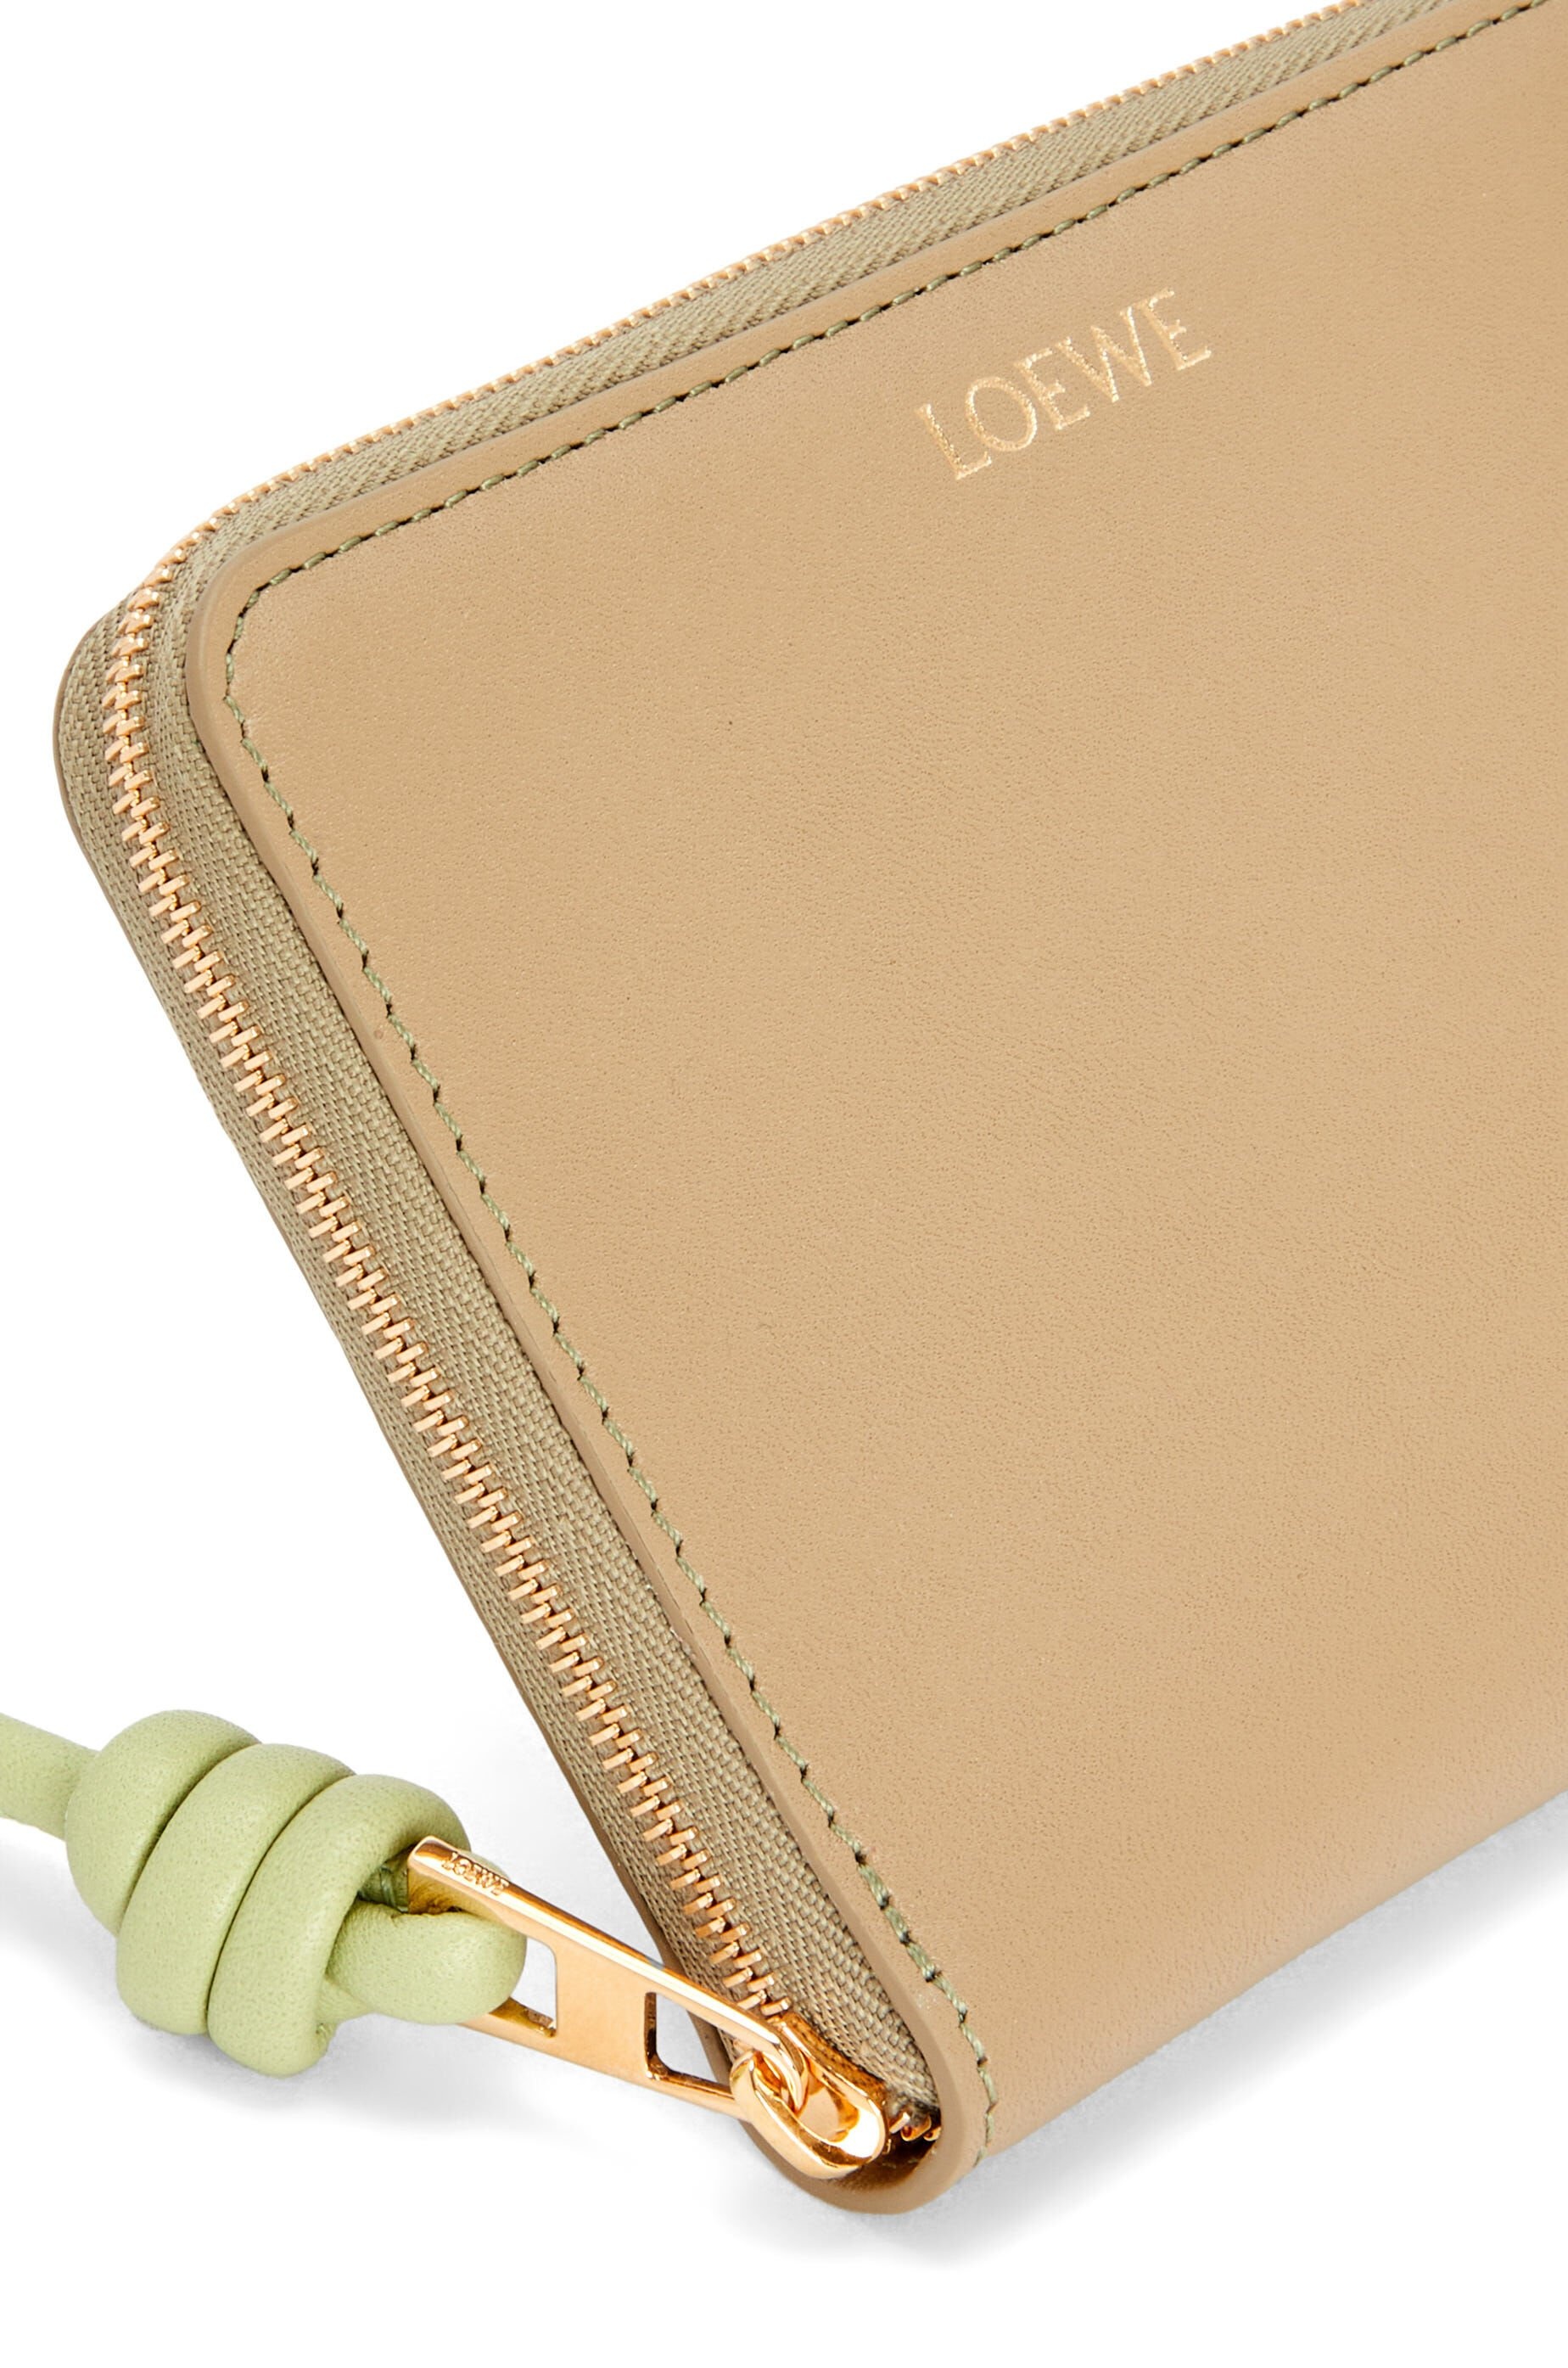 LOEWE Knot Compact Zip Wallet in Shiny Nappa Calfskin Clay Green/Lime Green